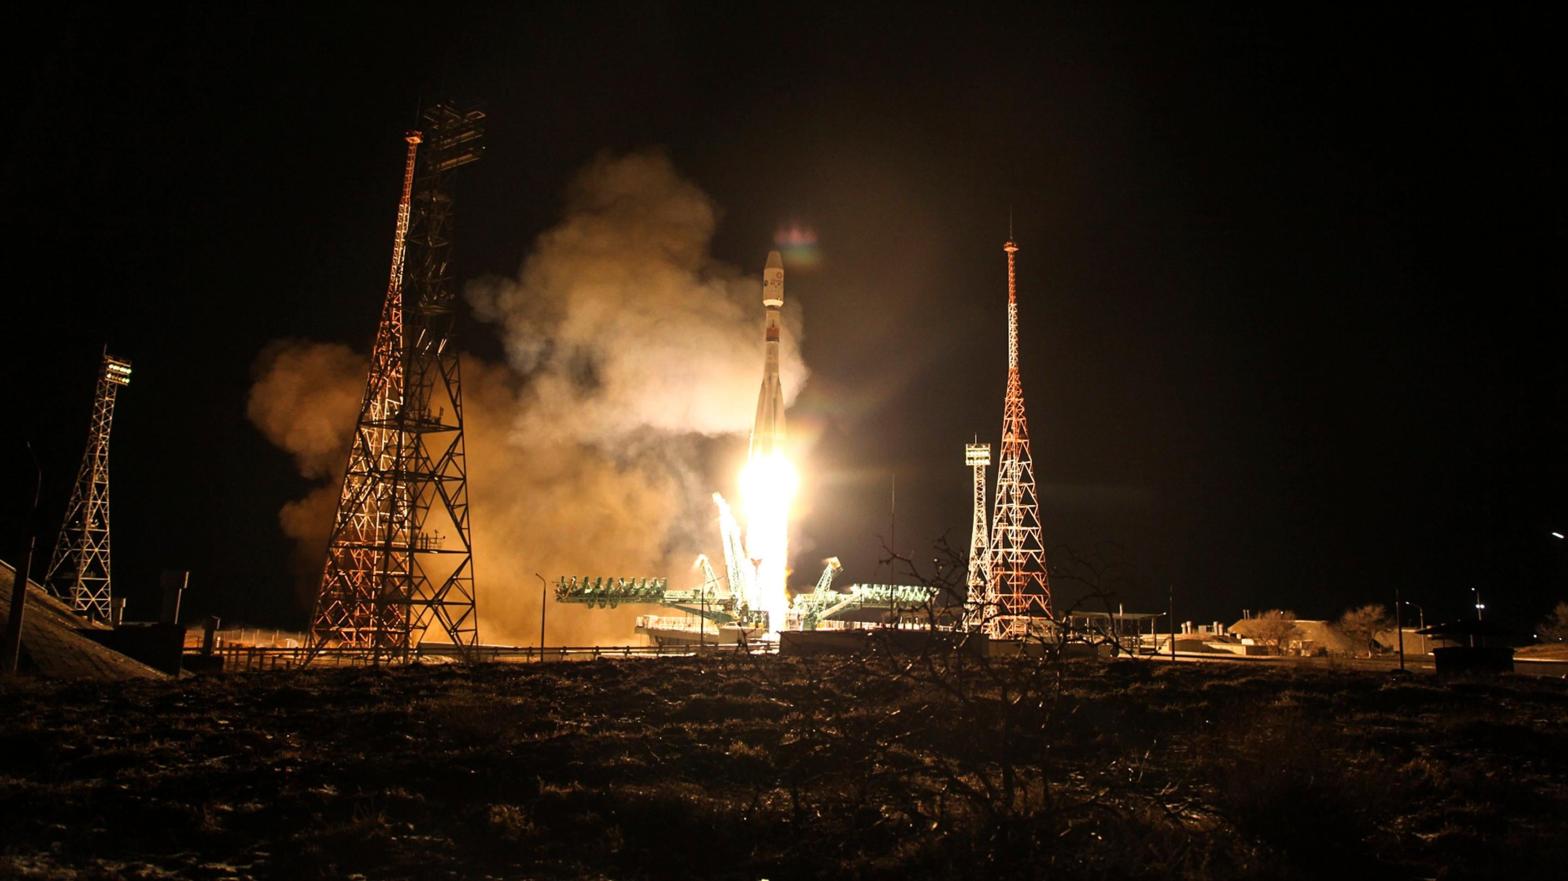 Russia's Soyuz rockets had been delivering OneWeb's satellites to orbit from Baikonur, Kazakhstan. (Photo: Roscosmos Space Agency Press Service, AP)